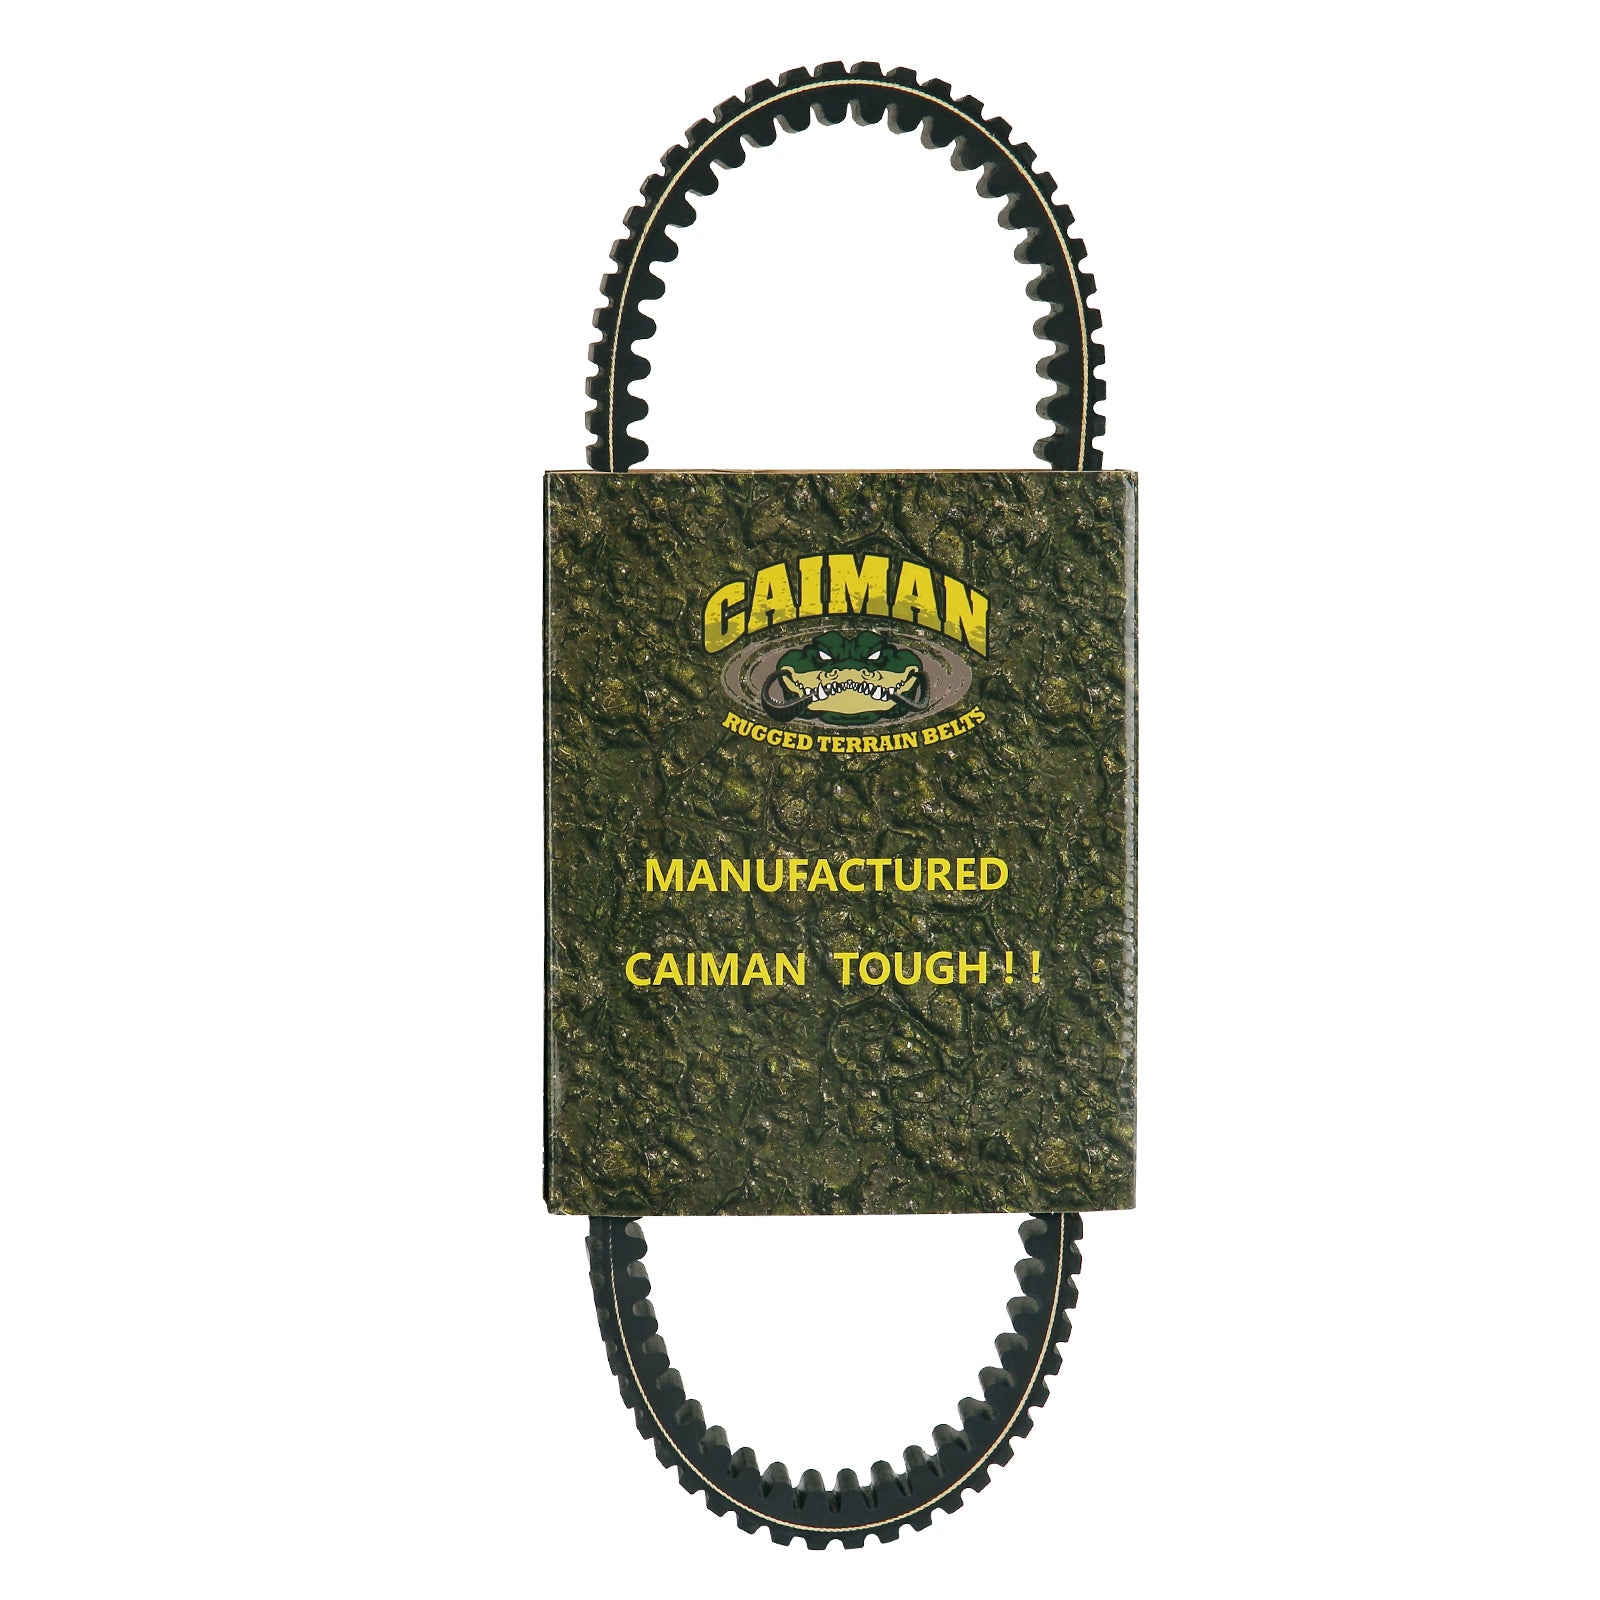 Welcome to American CV - home of the Caiman brand Axles!